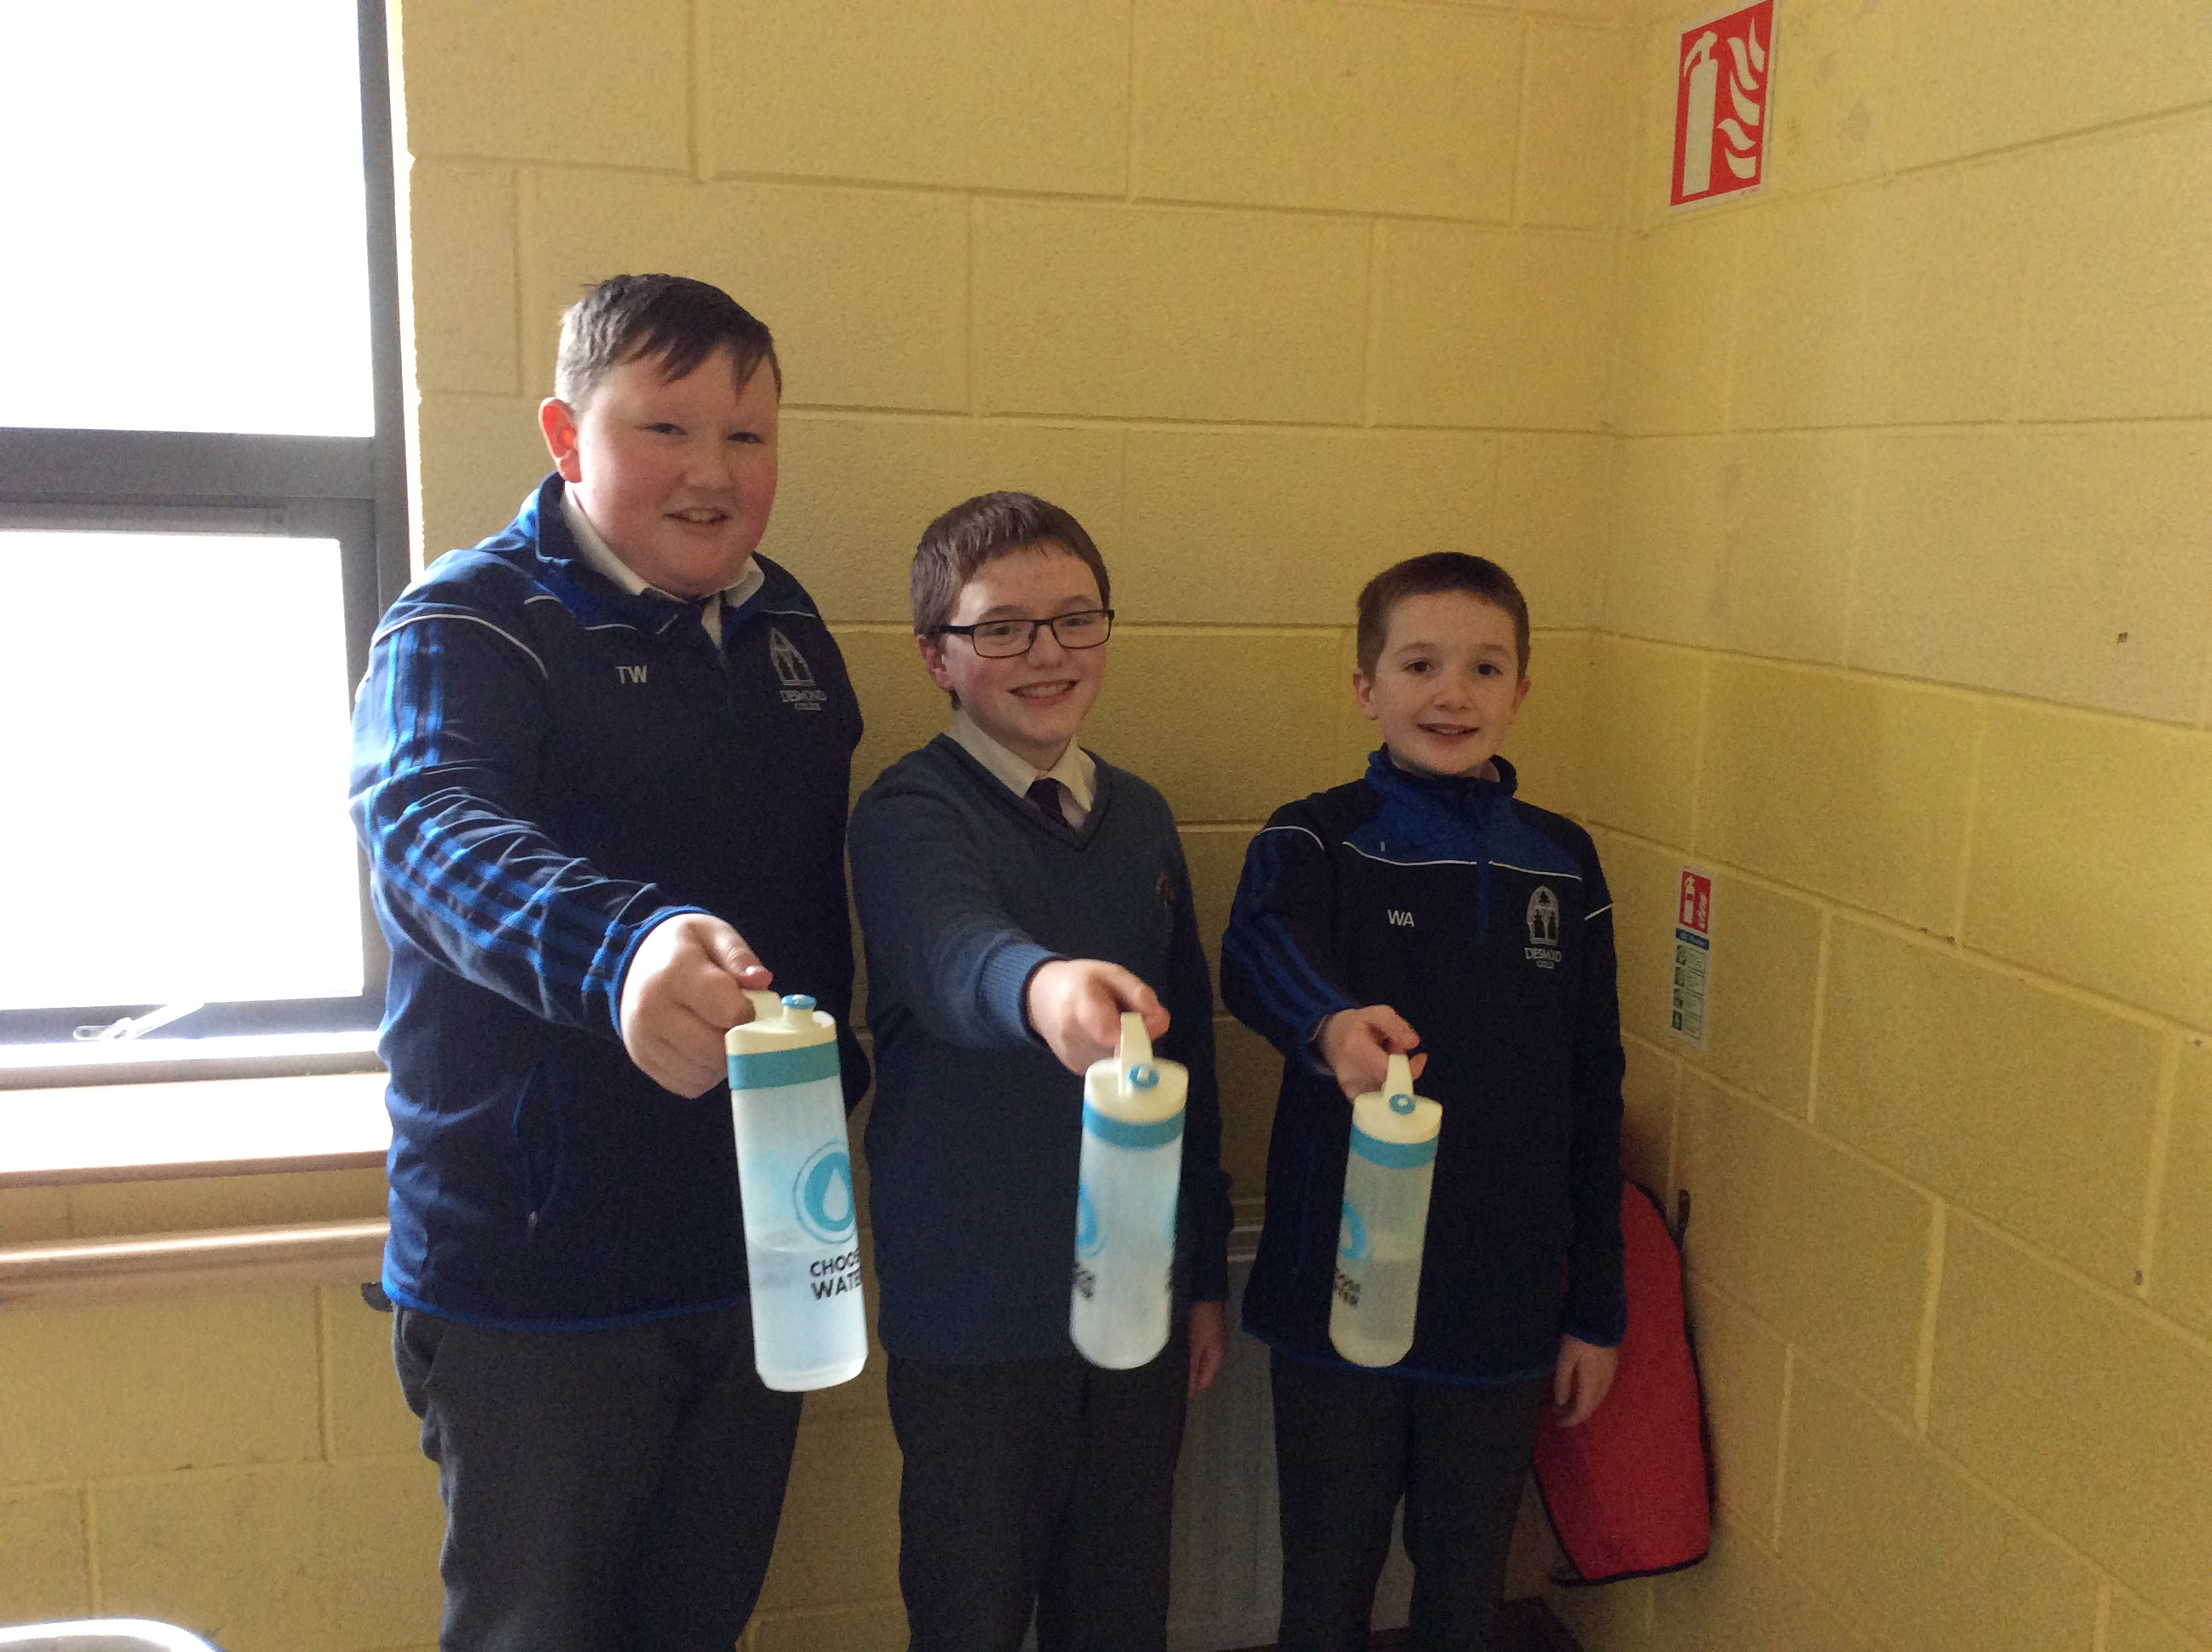 Tomás White, Patrick O Grady and William Ahern showing off their new refillable water bottles